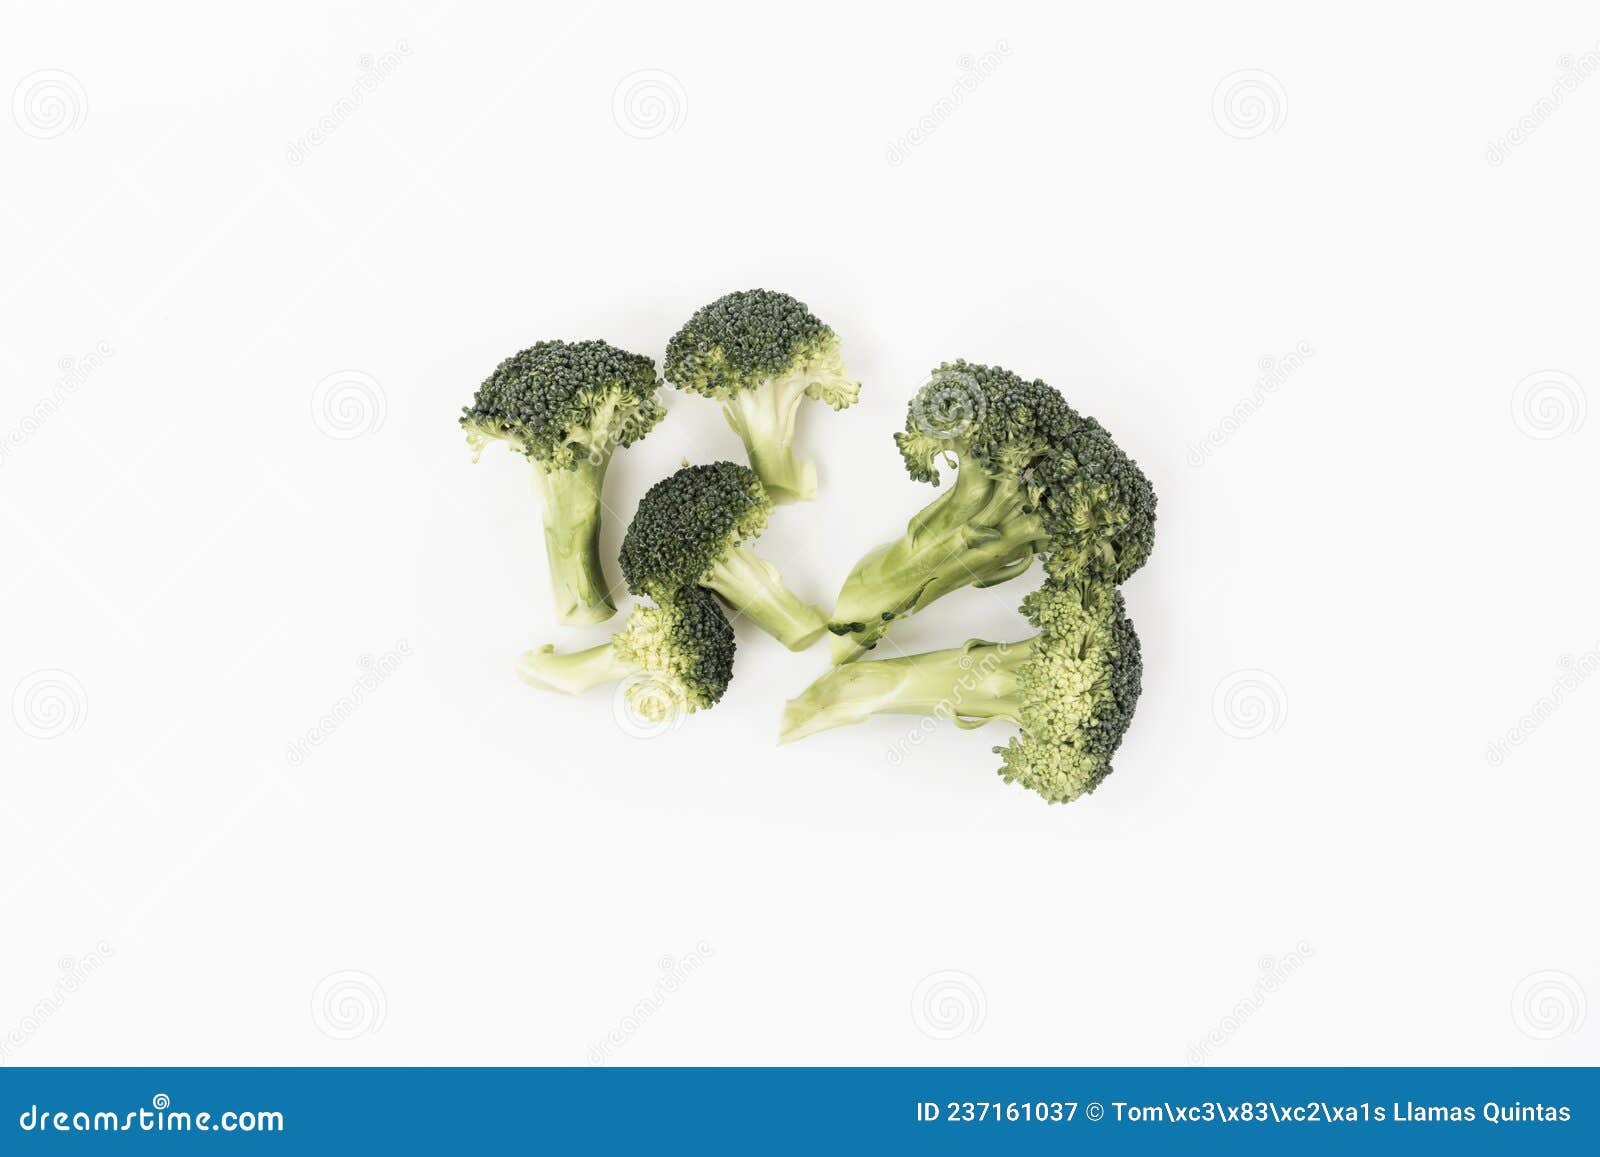 several small green broccoli twigs with raw stem on plain white background